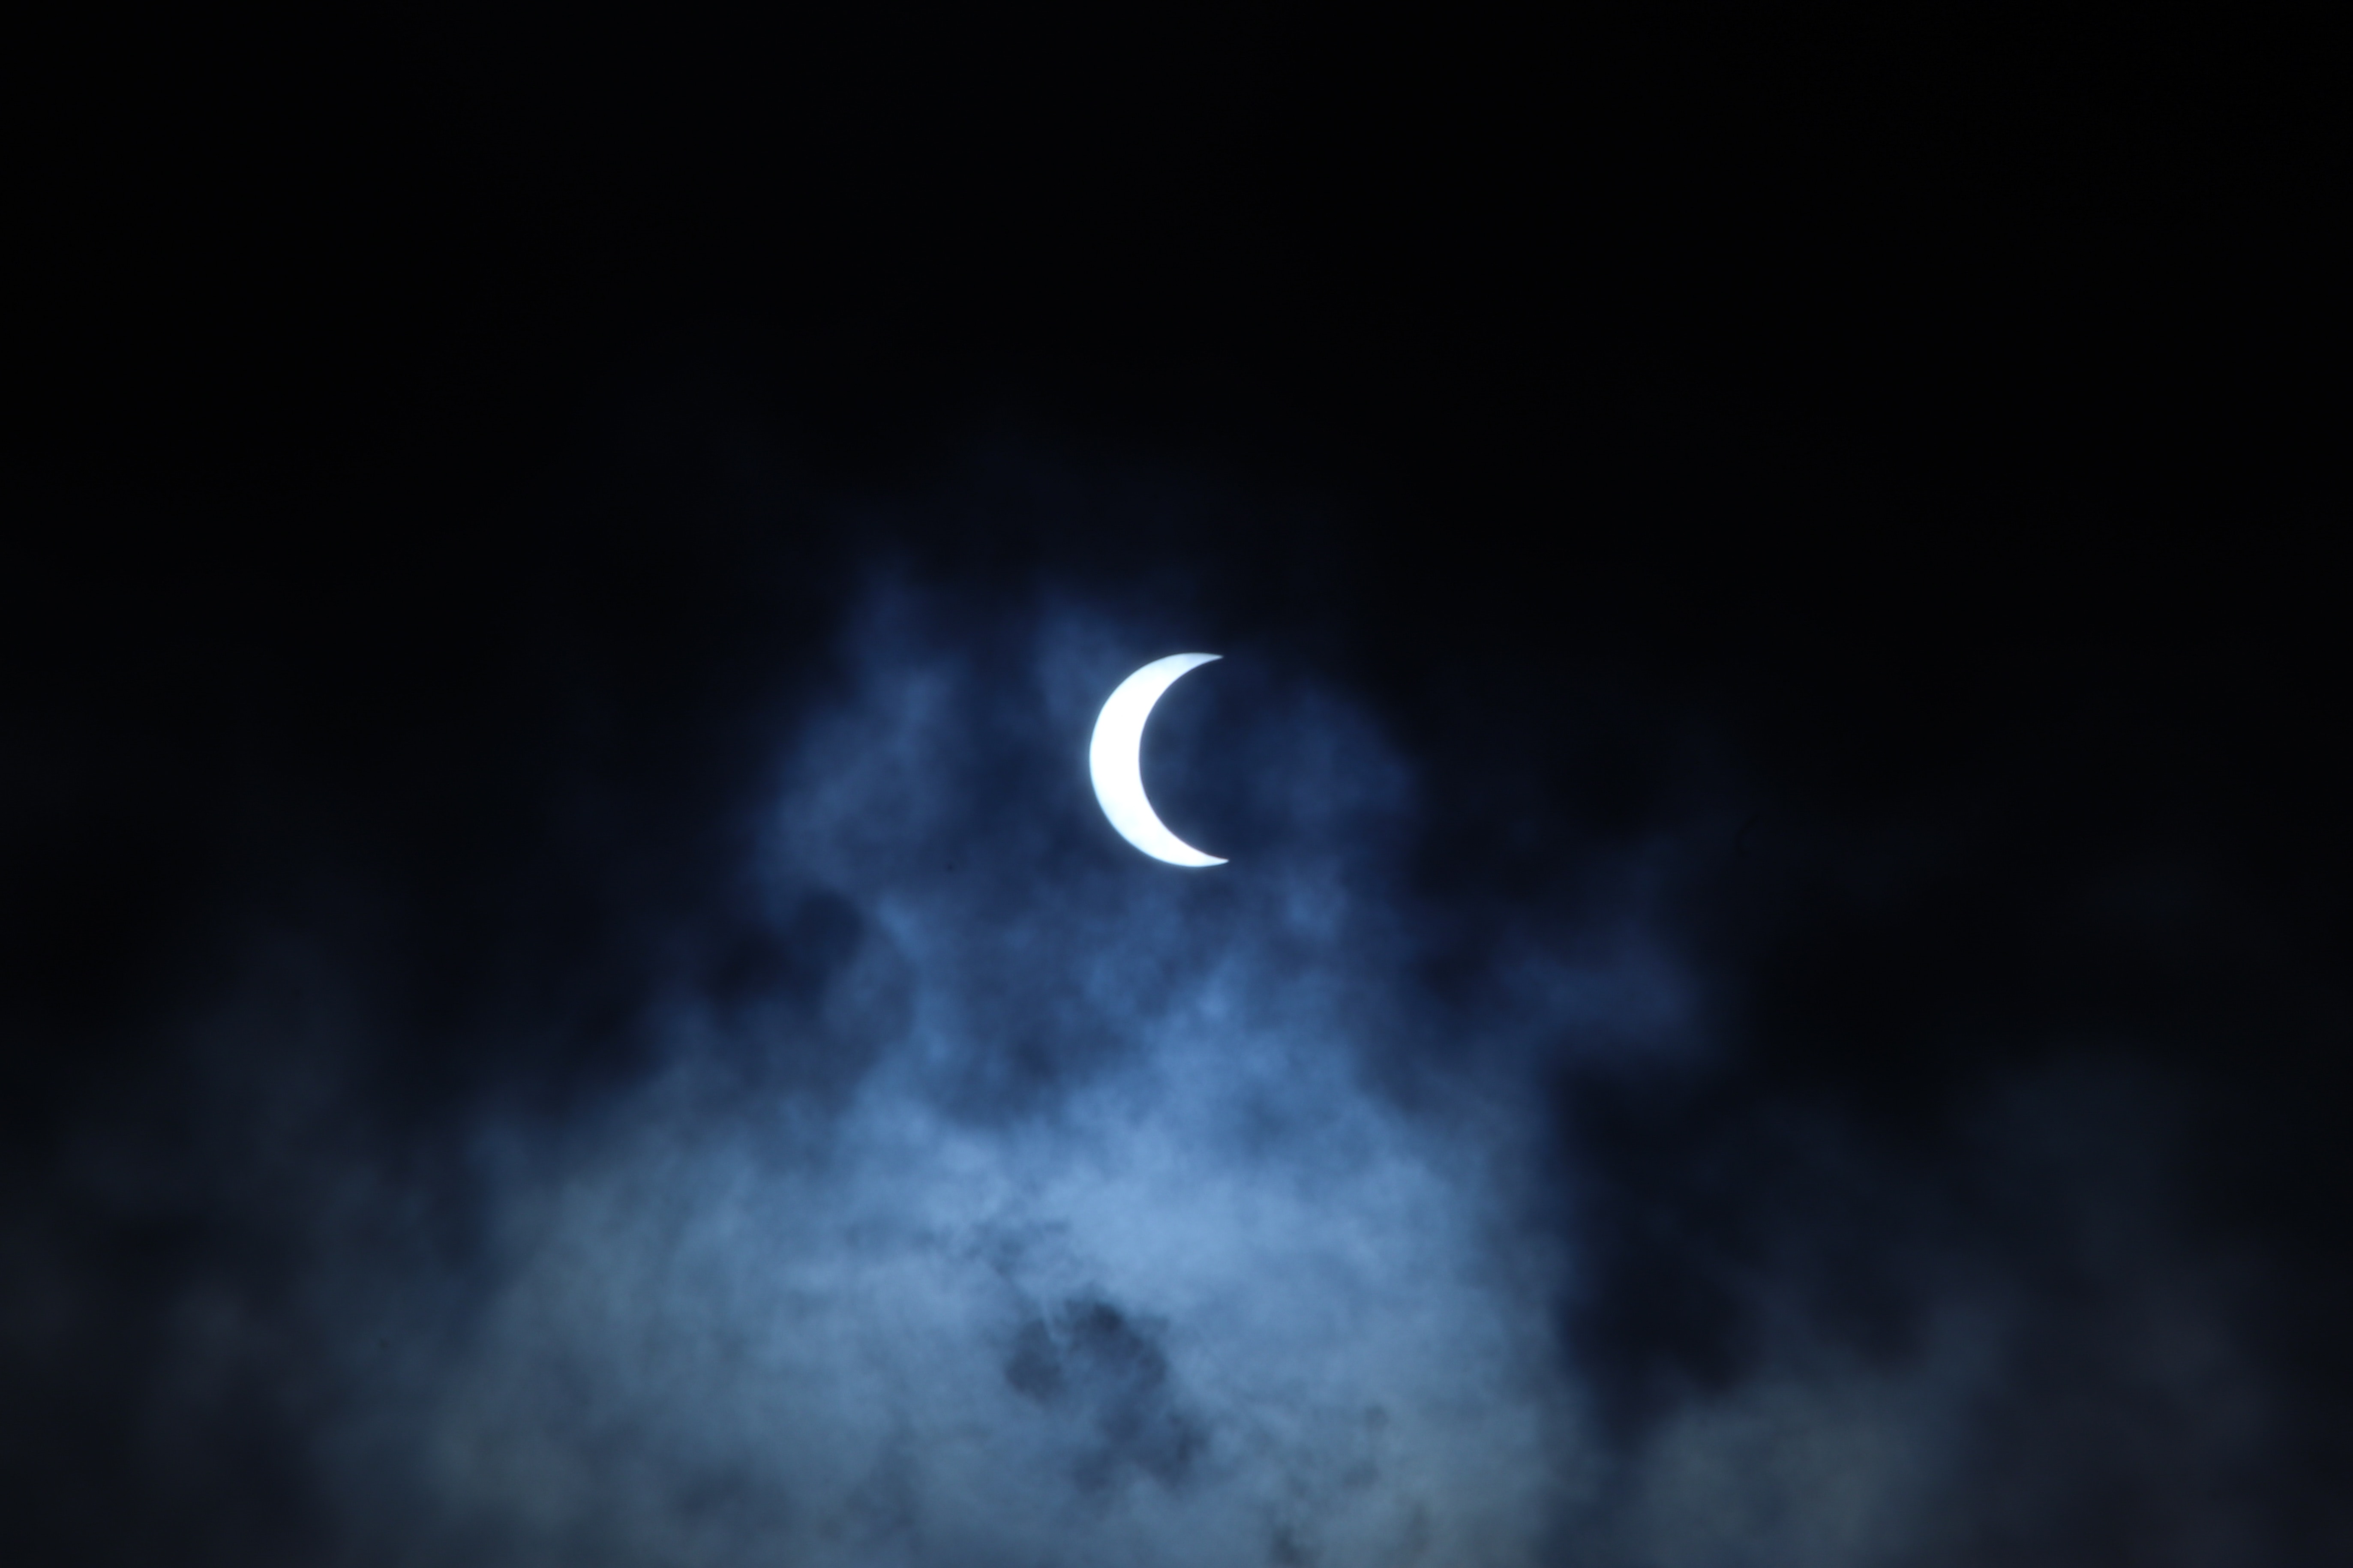 102404 free wallpaper 720x1280 for phone, download images clouds, dark, moon, sky 720x1280 for mobile